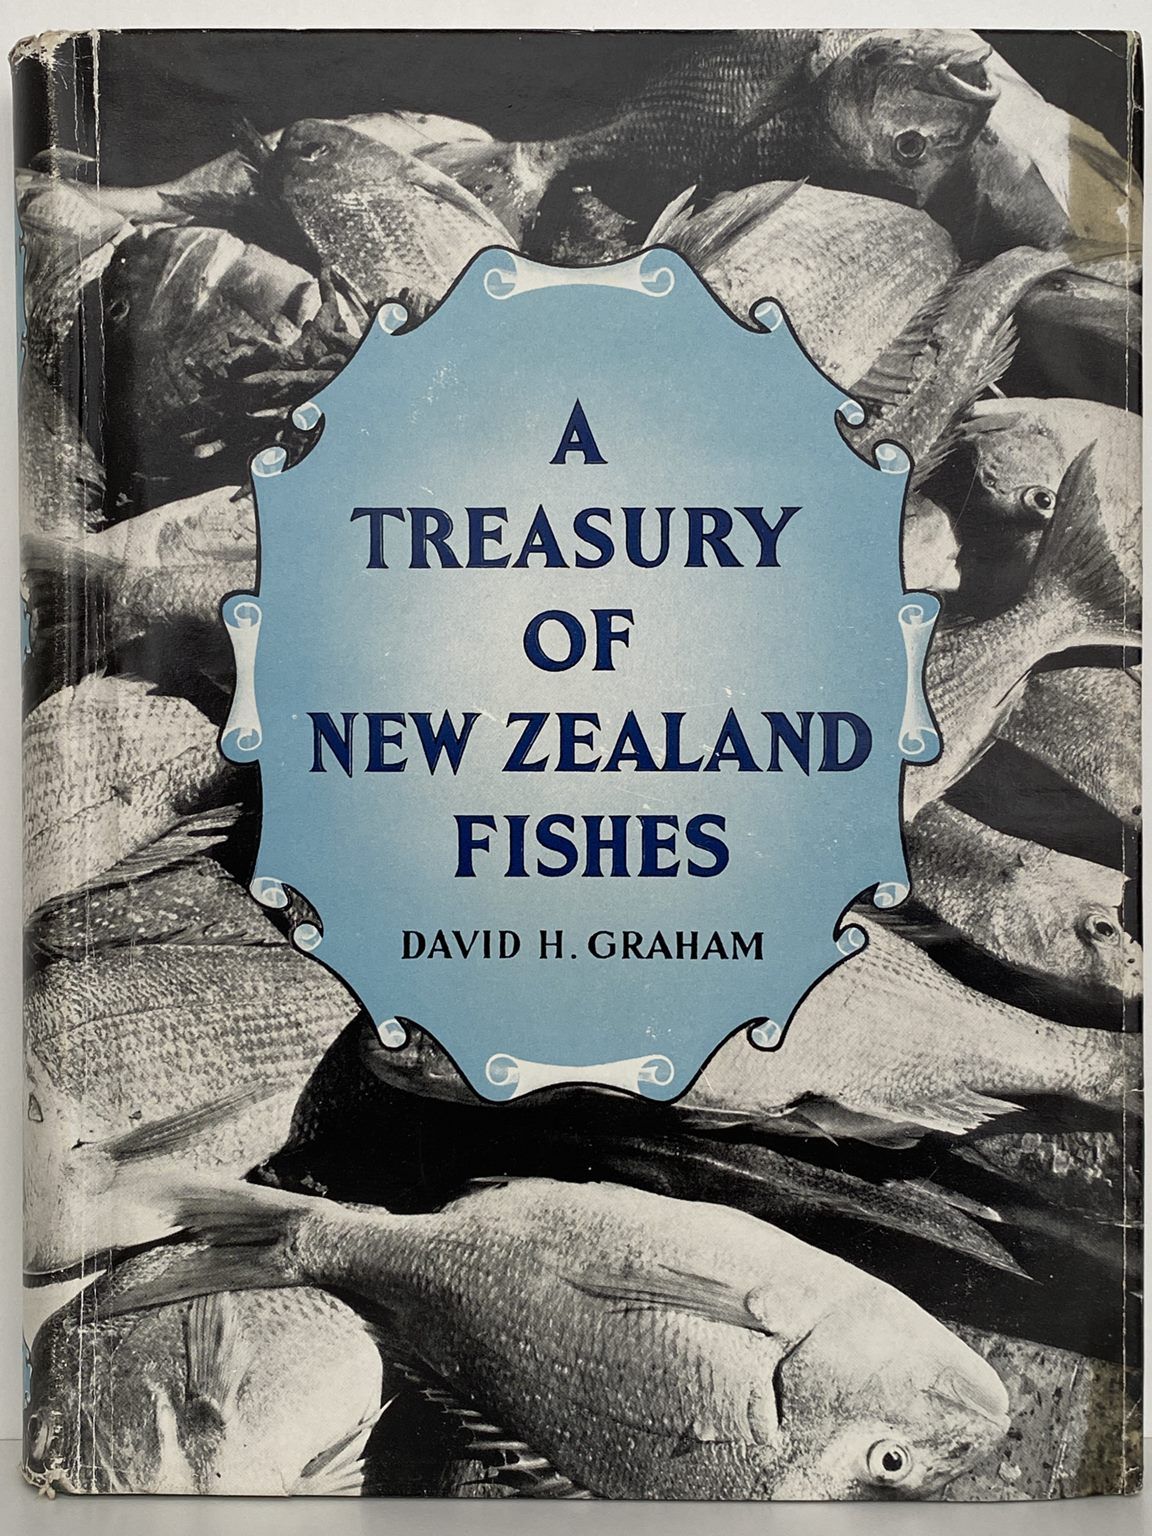 A TREASURY OF NEW ZEALAND FISHES